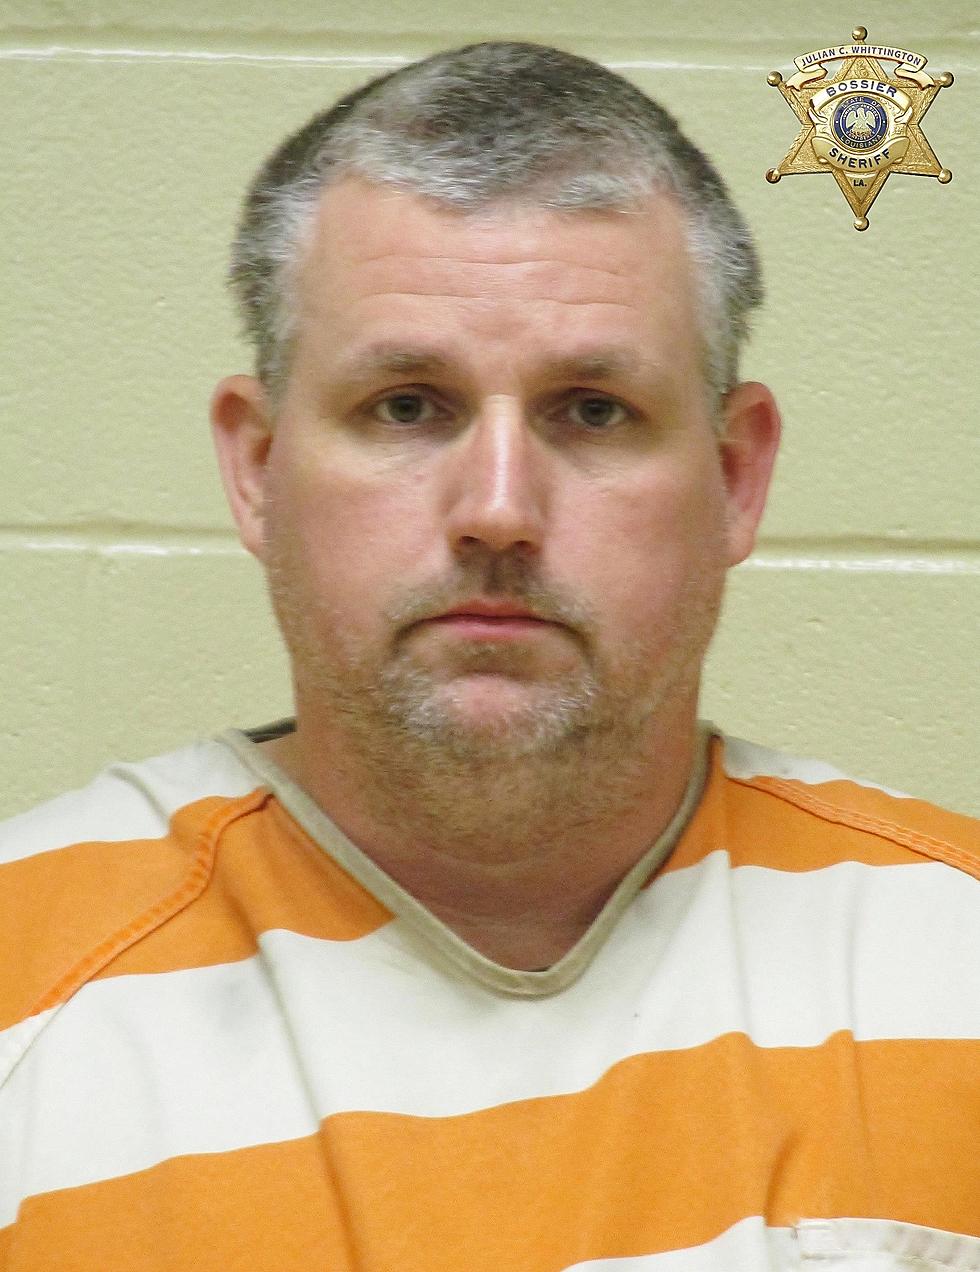 Bossier Elementary Teacher Now Charged with Rape